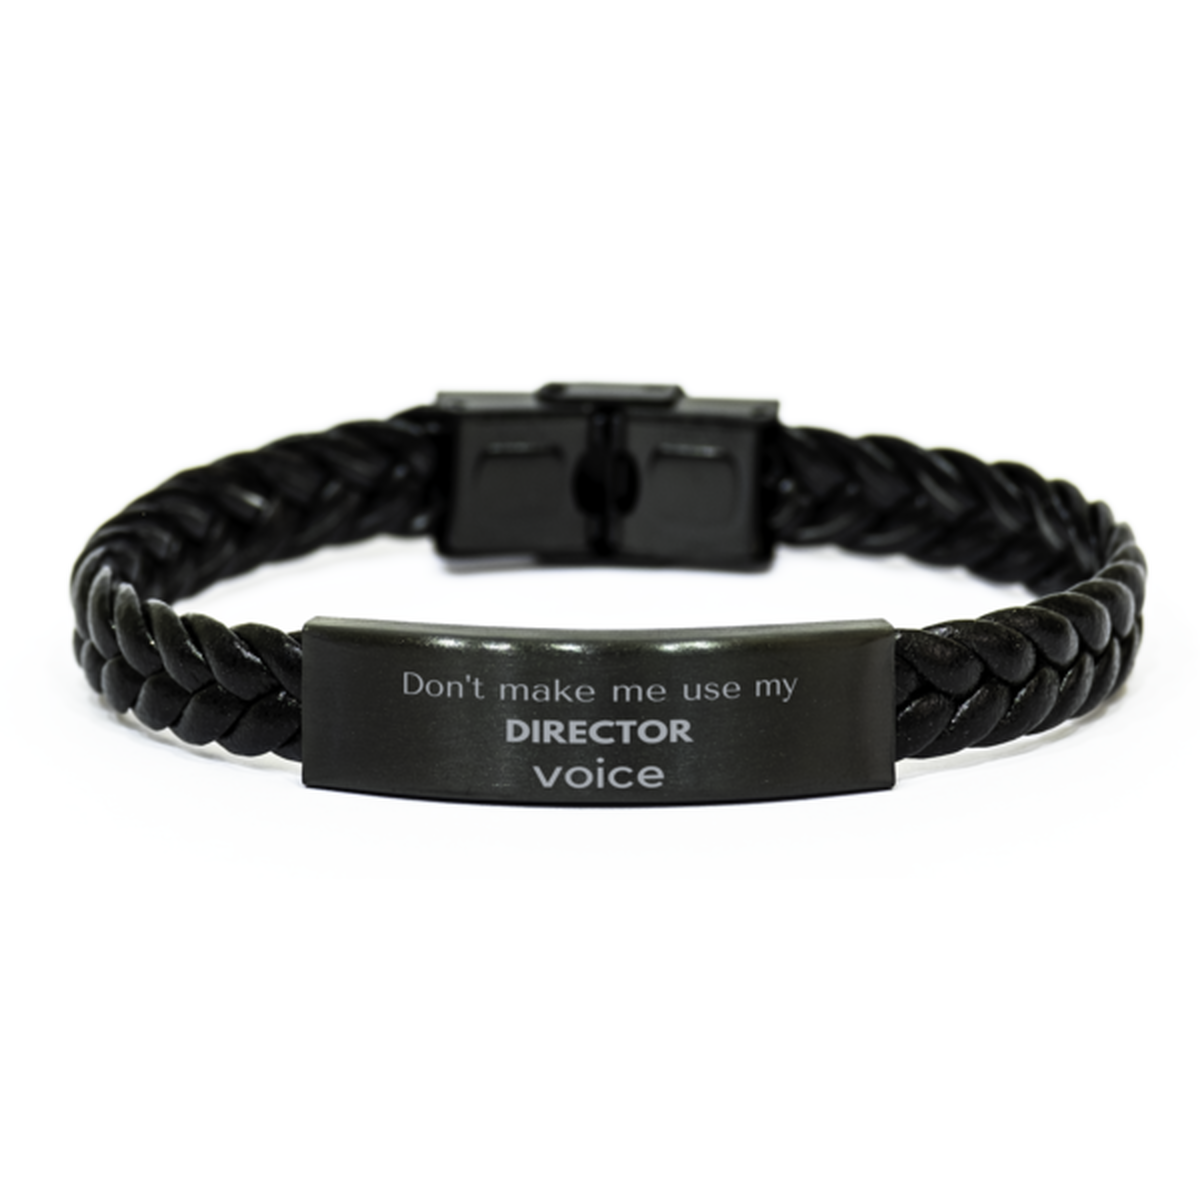 Don't make me use my Director voice, Sarcasm Director Gifts, Christmas Director Braided Leather Bracelet Birthday Unique Gifts For Director Coworkers, Men, Women, Colleague, Friends